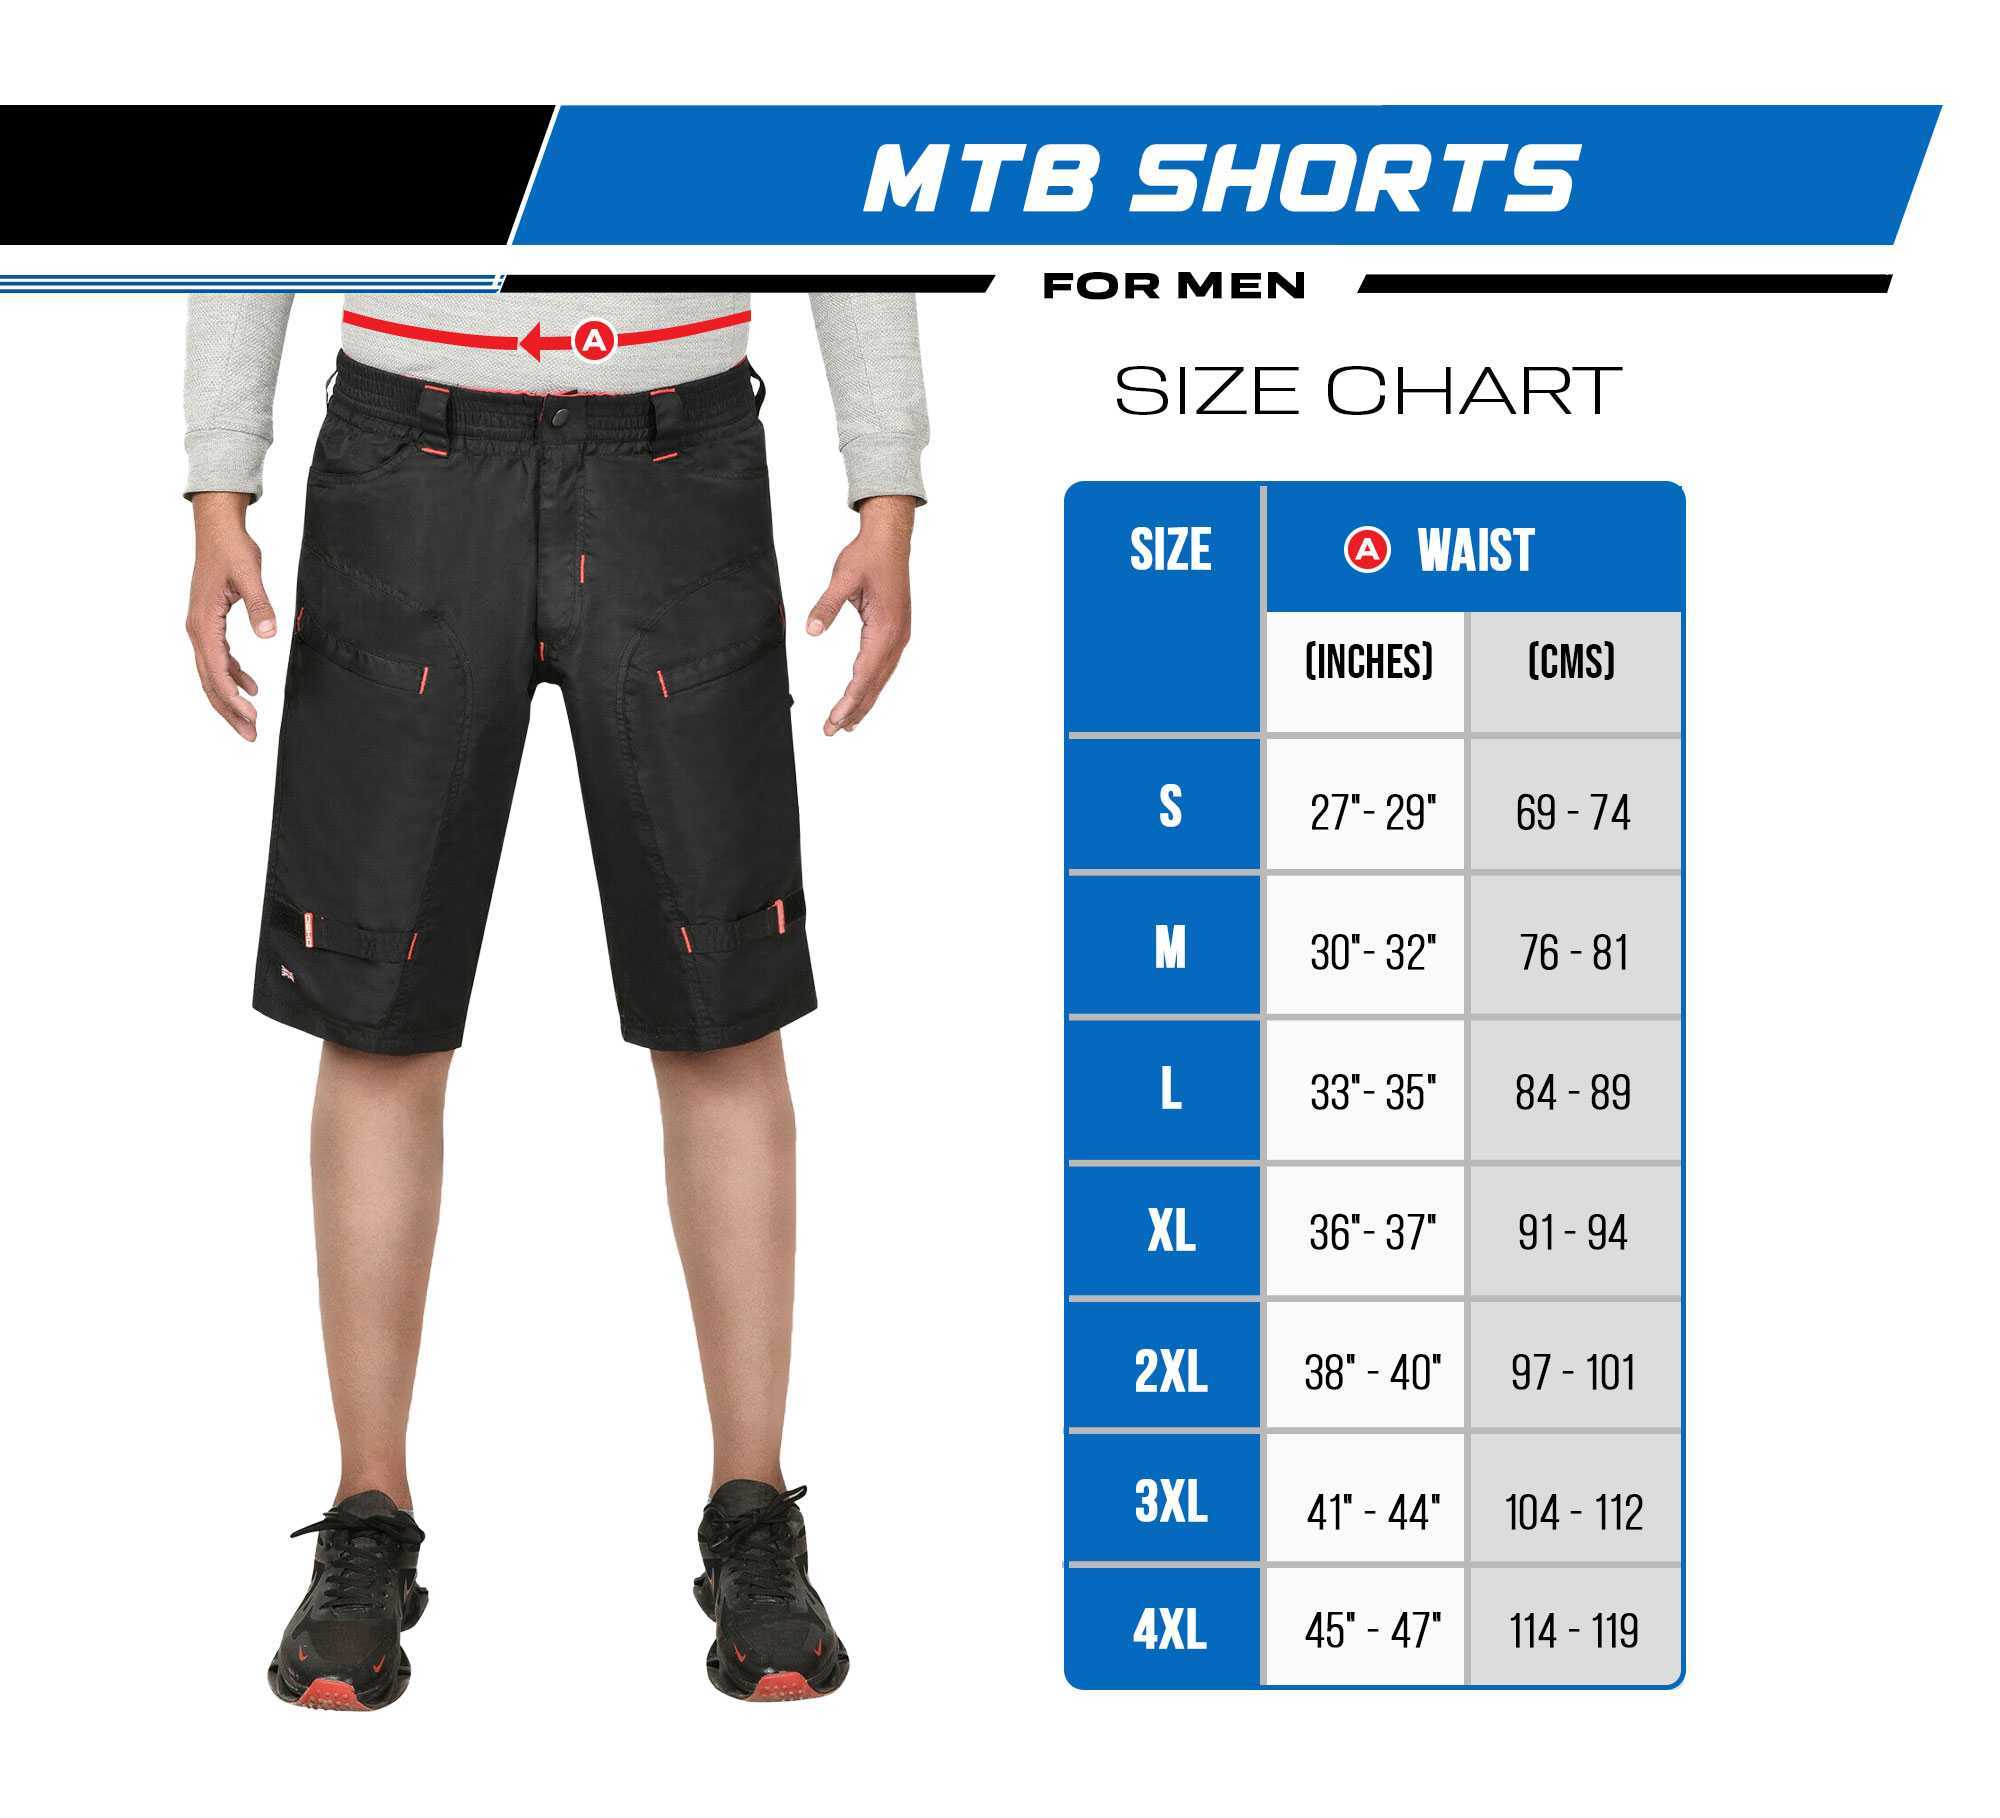 Men's Elite MTB Shorts | Mountain Bike Shorts with Removable Liner